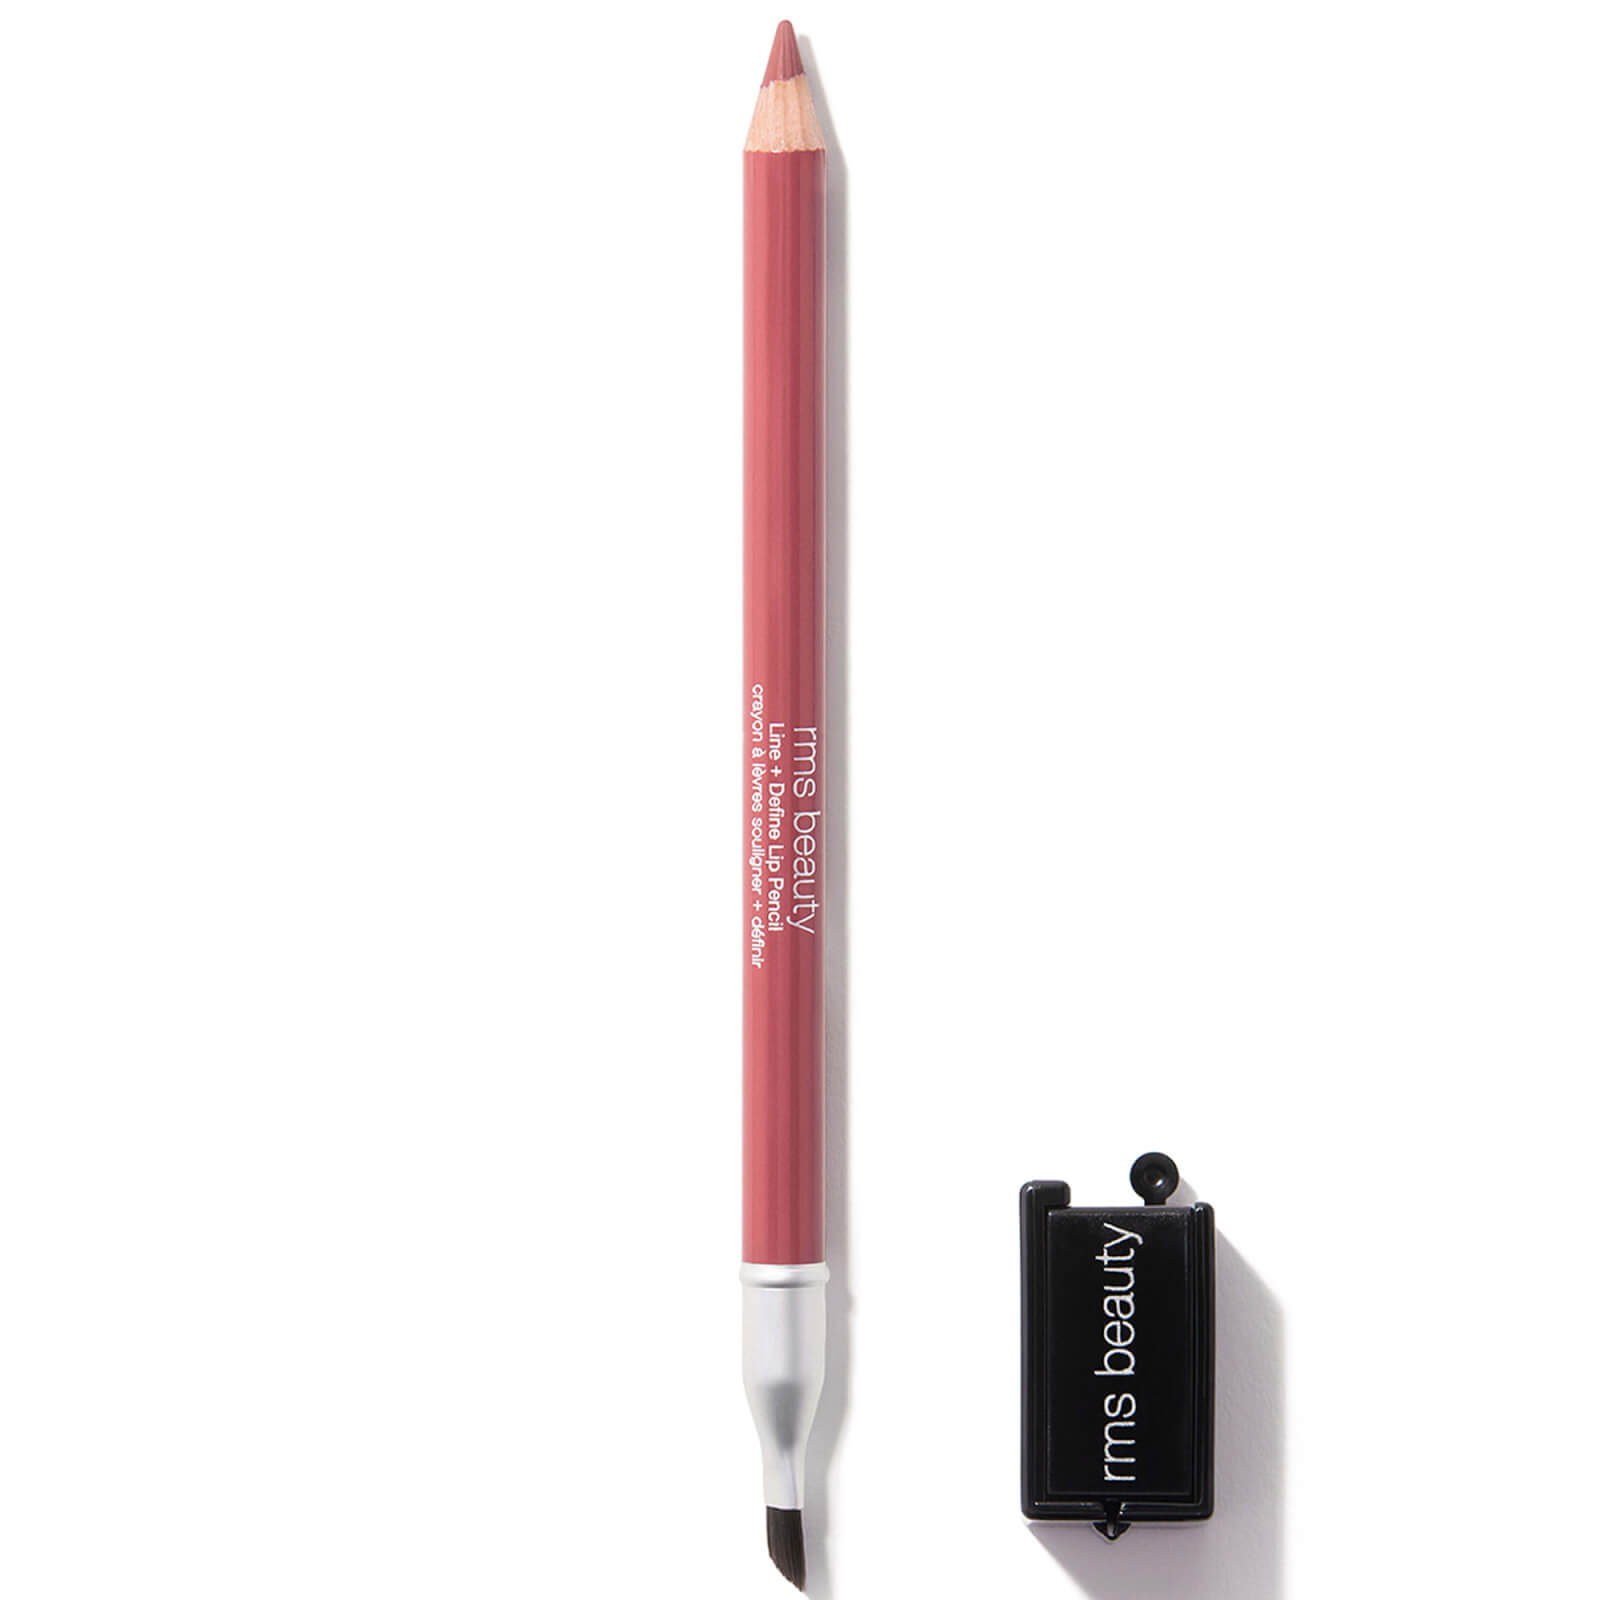 Rms Beauty Go Nude Lip Pencil 1.08g (various Shades) - Morning Dew